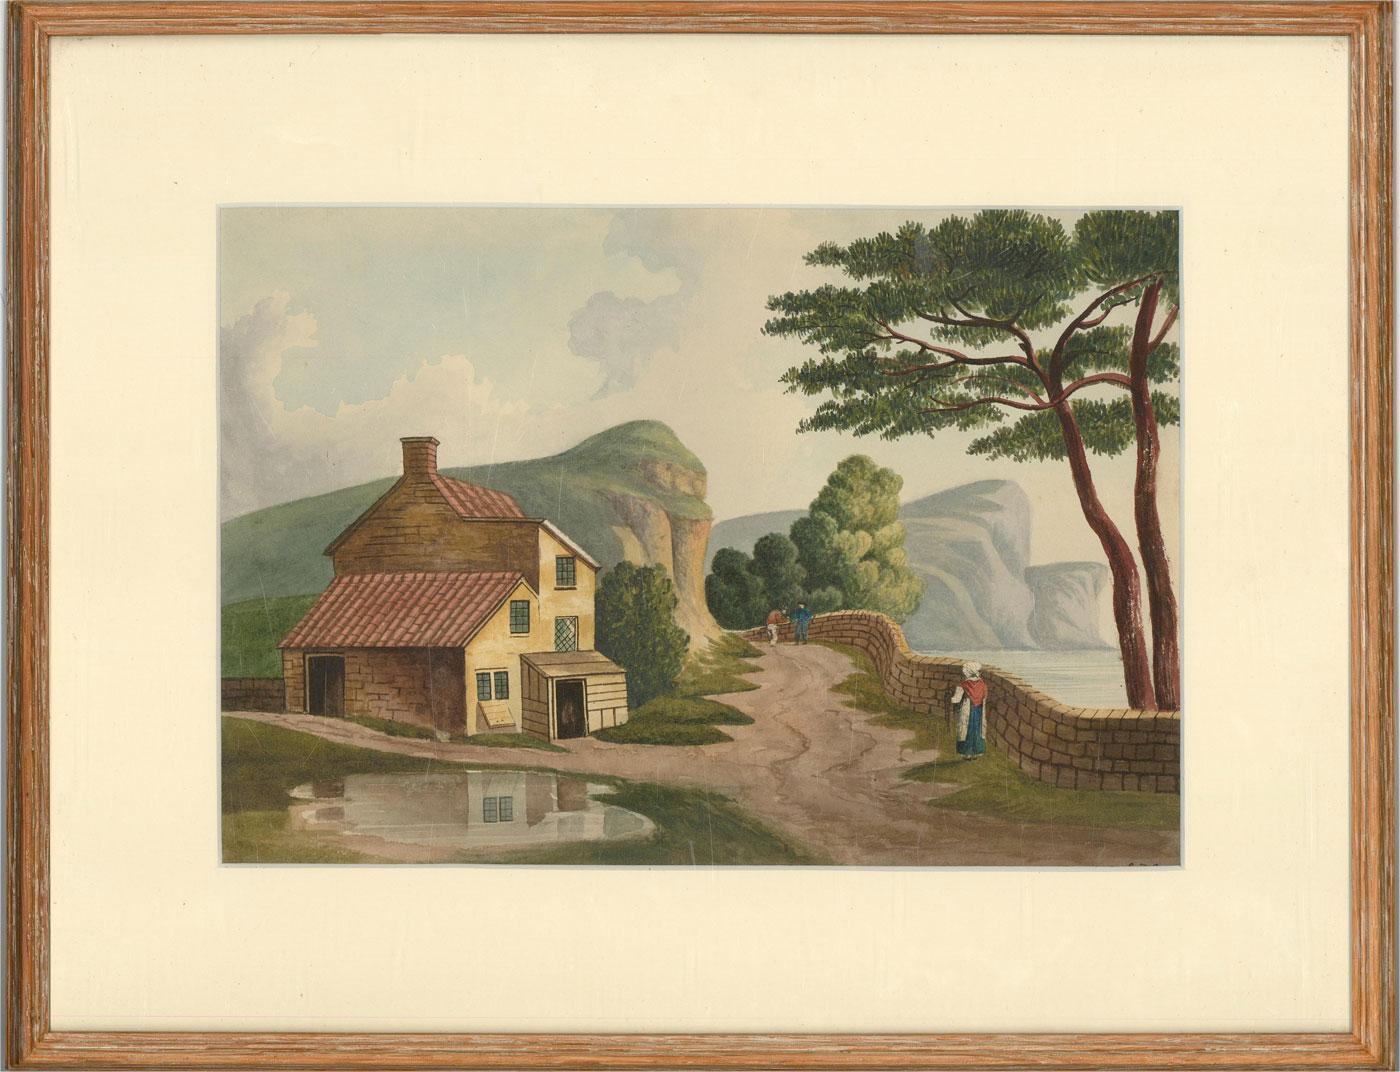 Unknown Landscape Art - Sophia Stansbury - 1826 Watercolour, Sea View with Figures